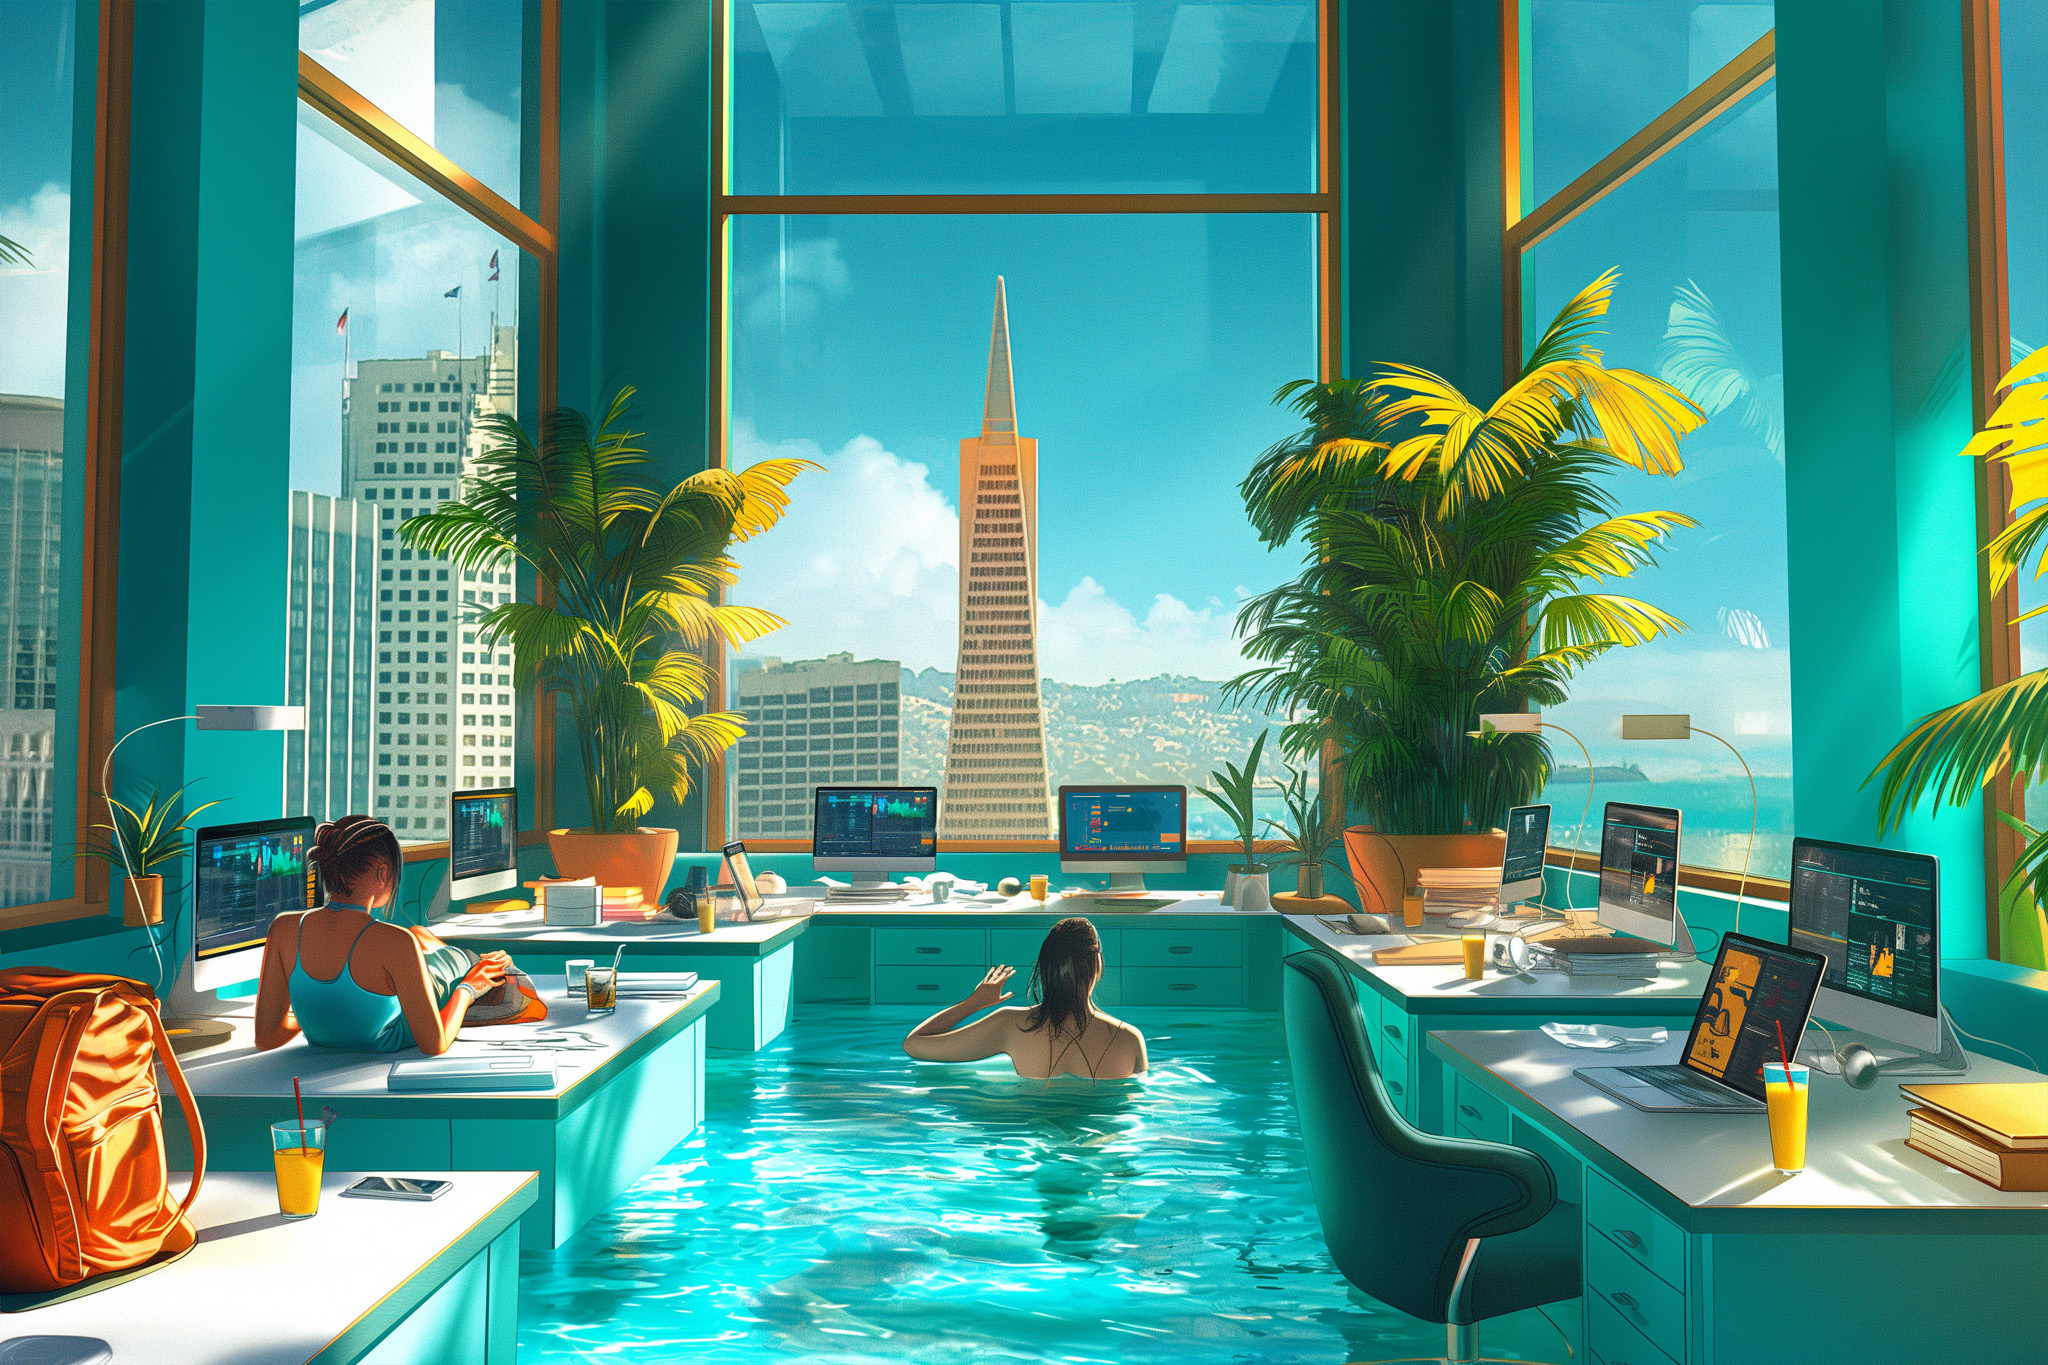 An office with desks and computers is merged with a pool. Two people work, one swims. Large windows reveal a sunny cityscape with skyscrapers.